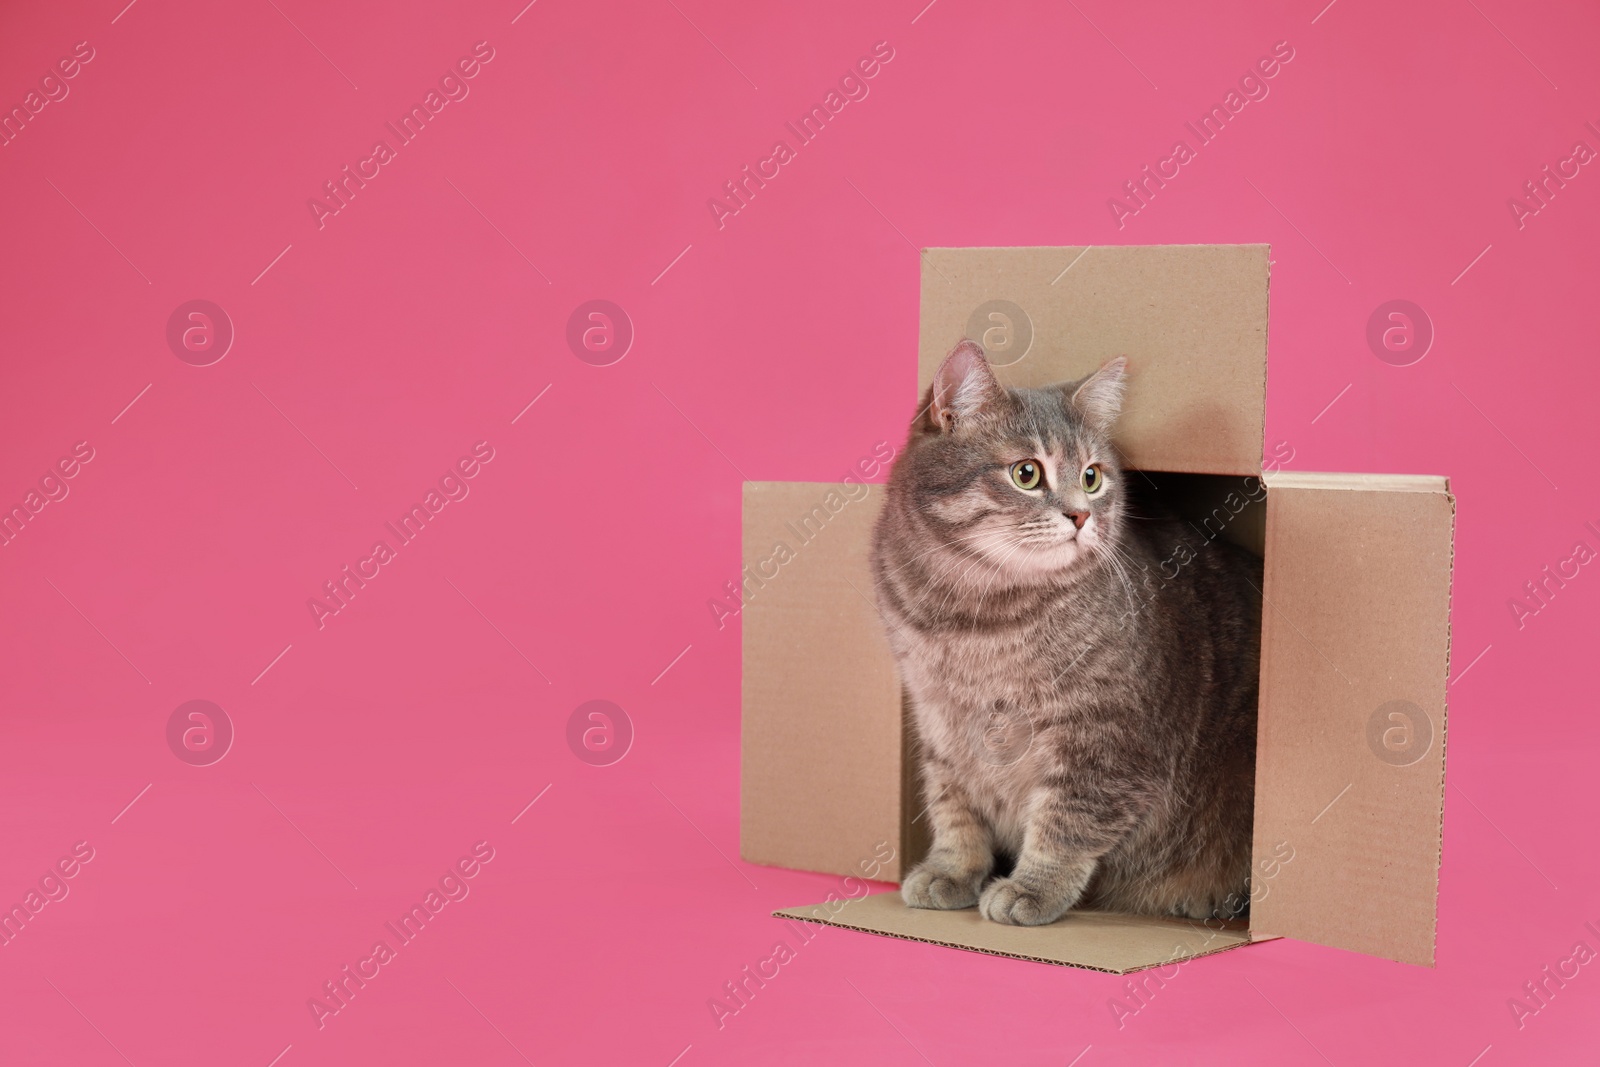 Photo of Cute grey tabby cat sitting in cardboard box on pink background